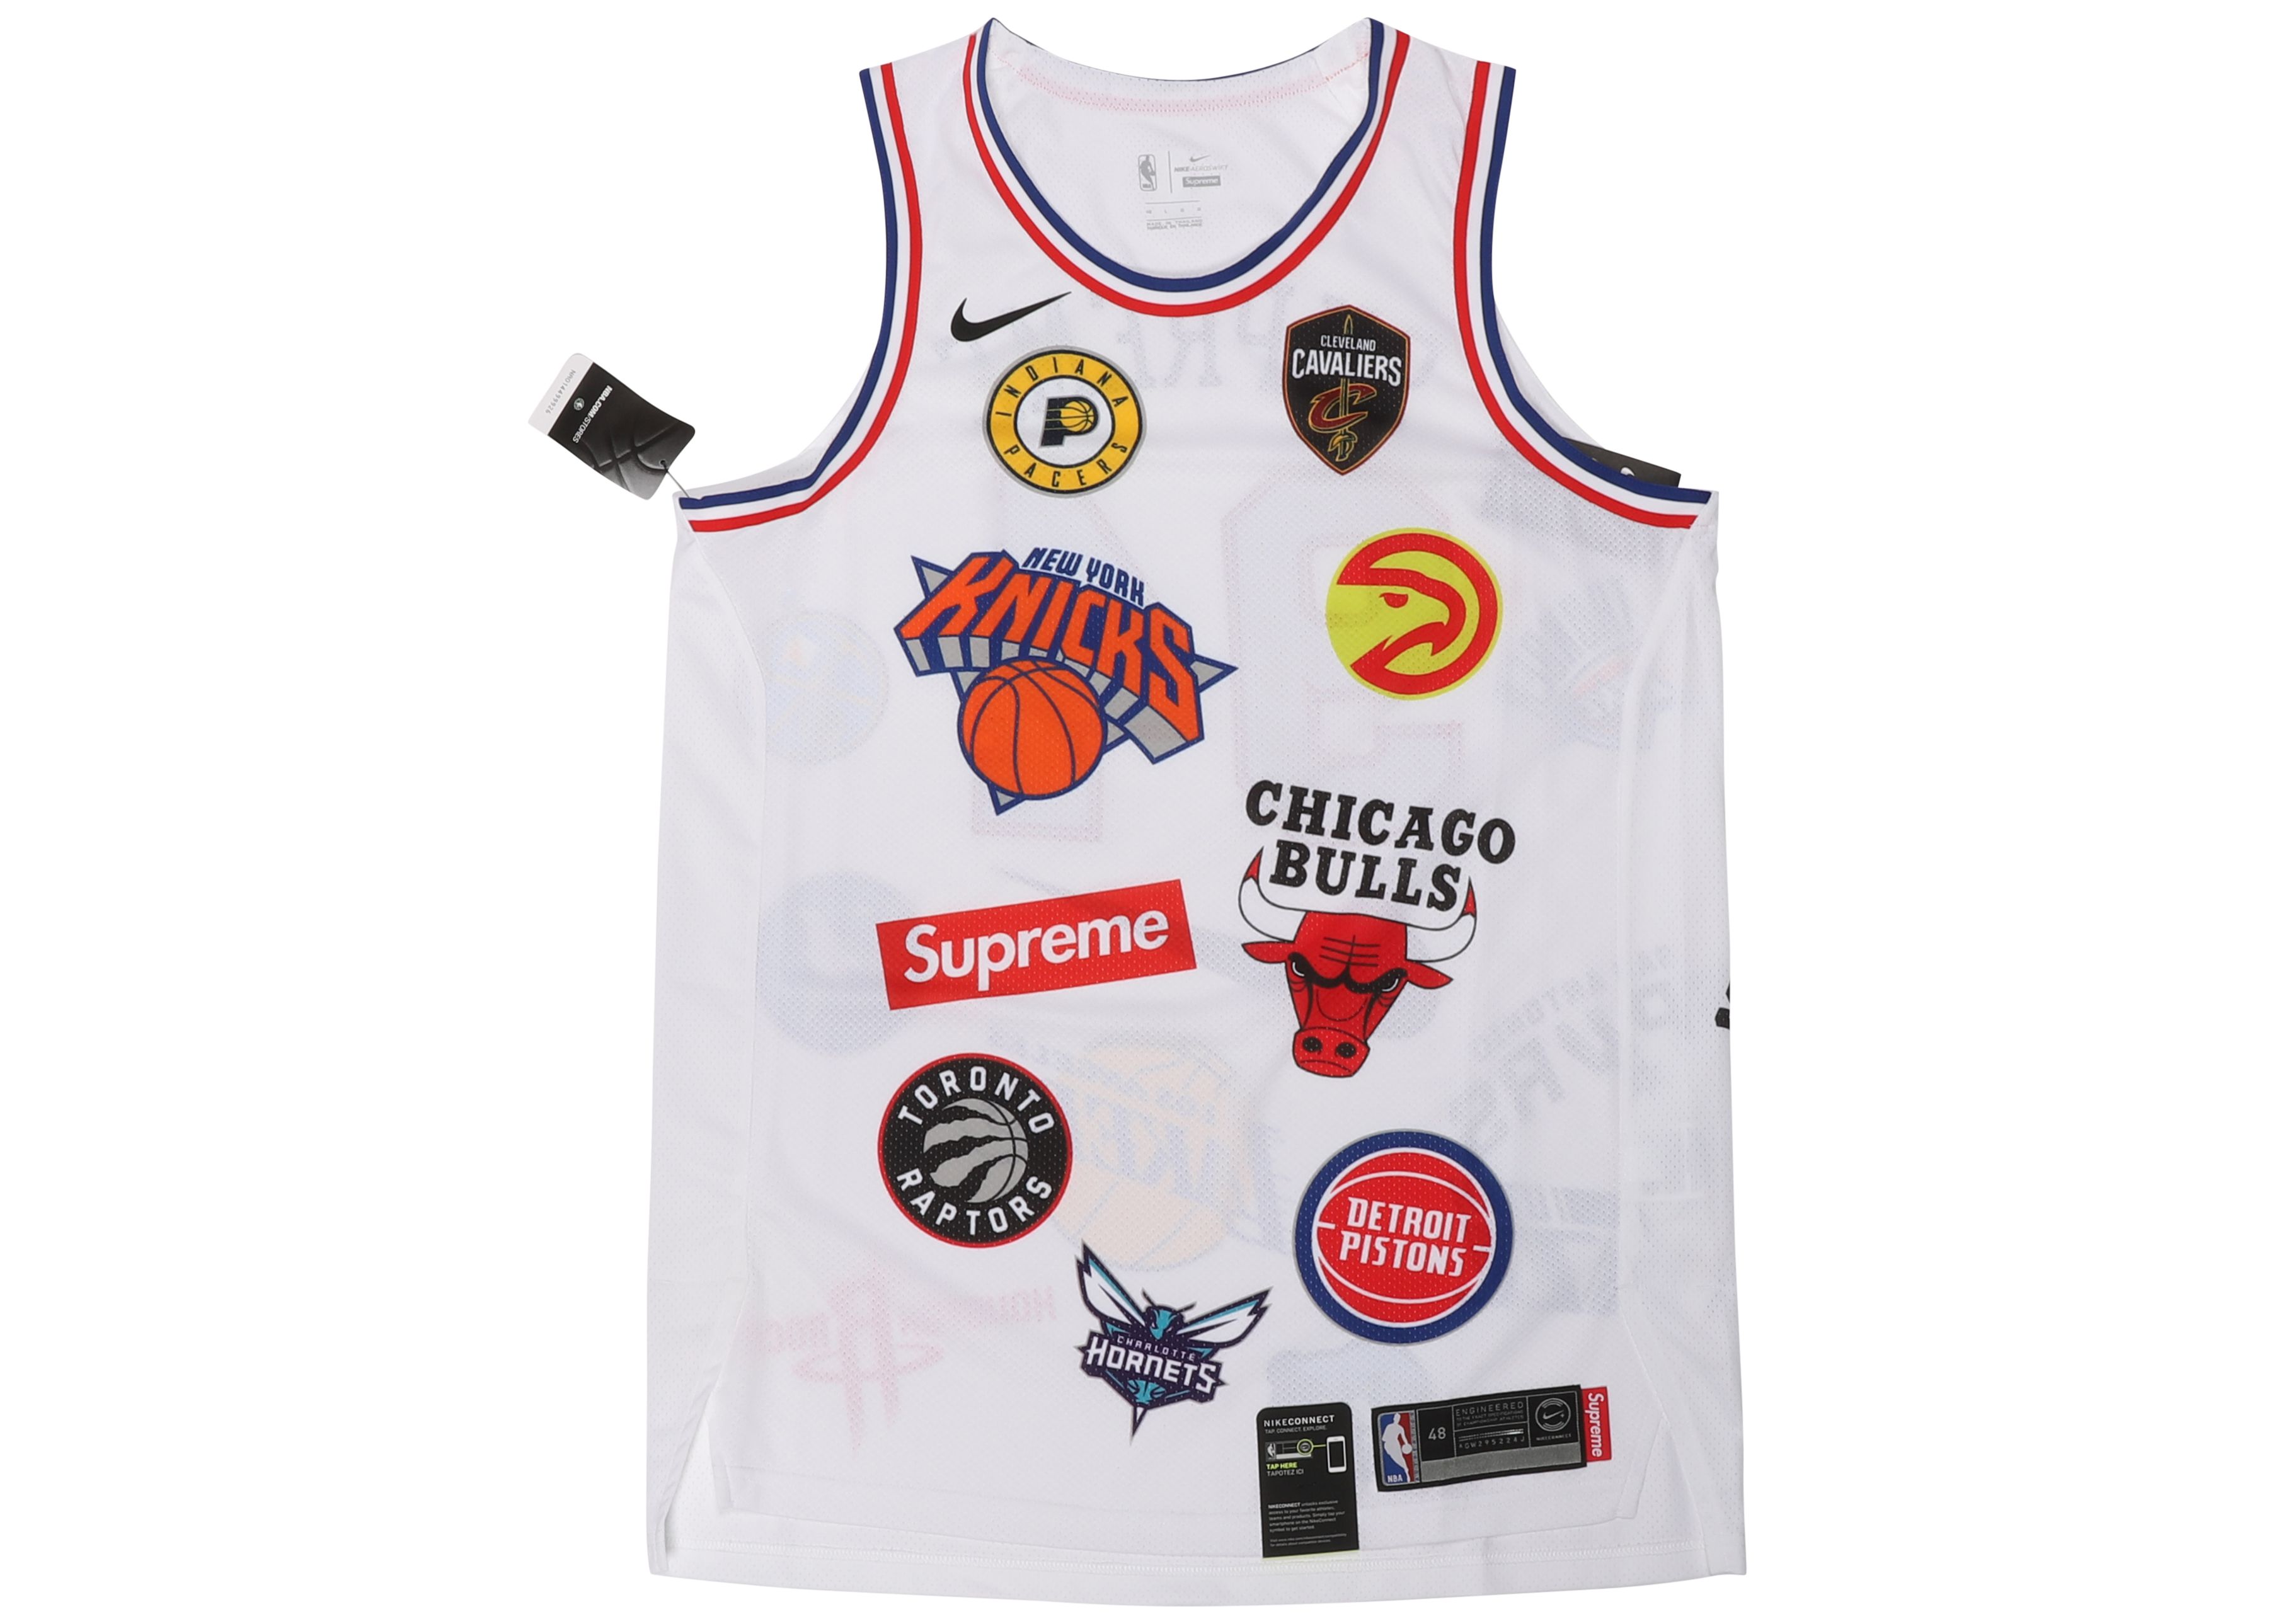 Supreme Nike/NBA Teams Authentic Jersey White - SS18 メンズ - JP